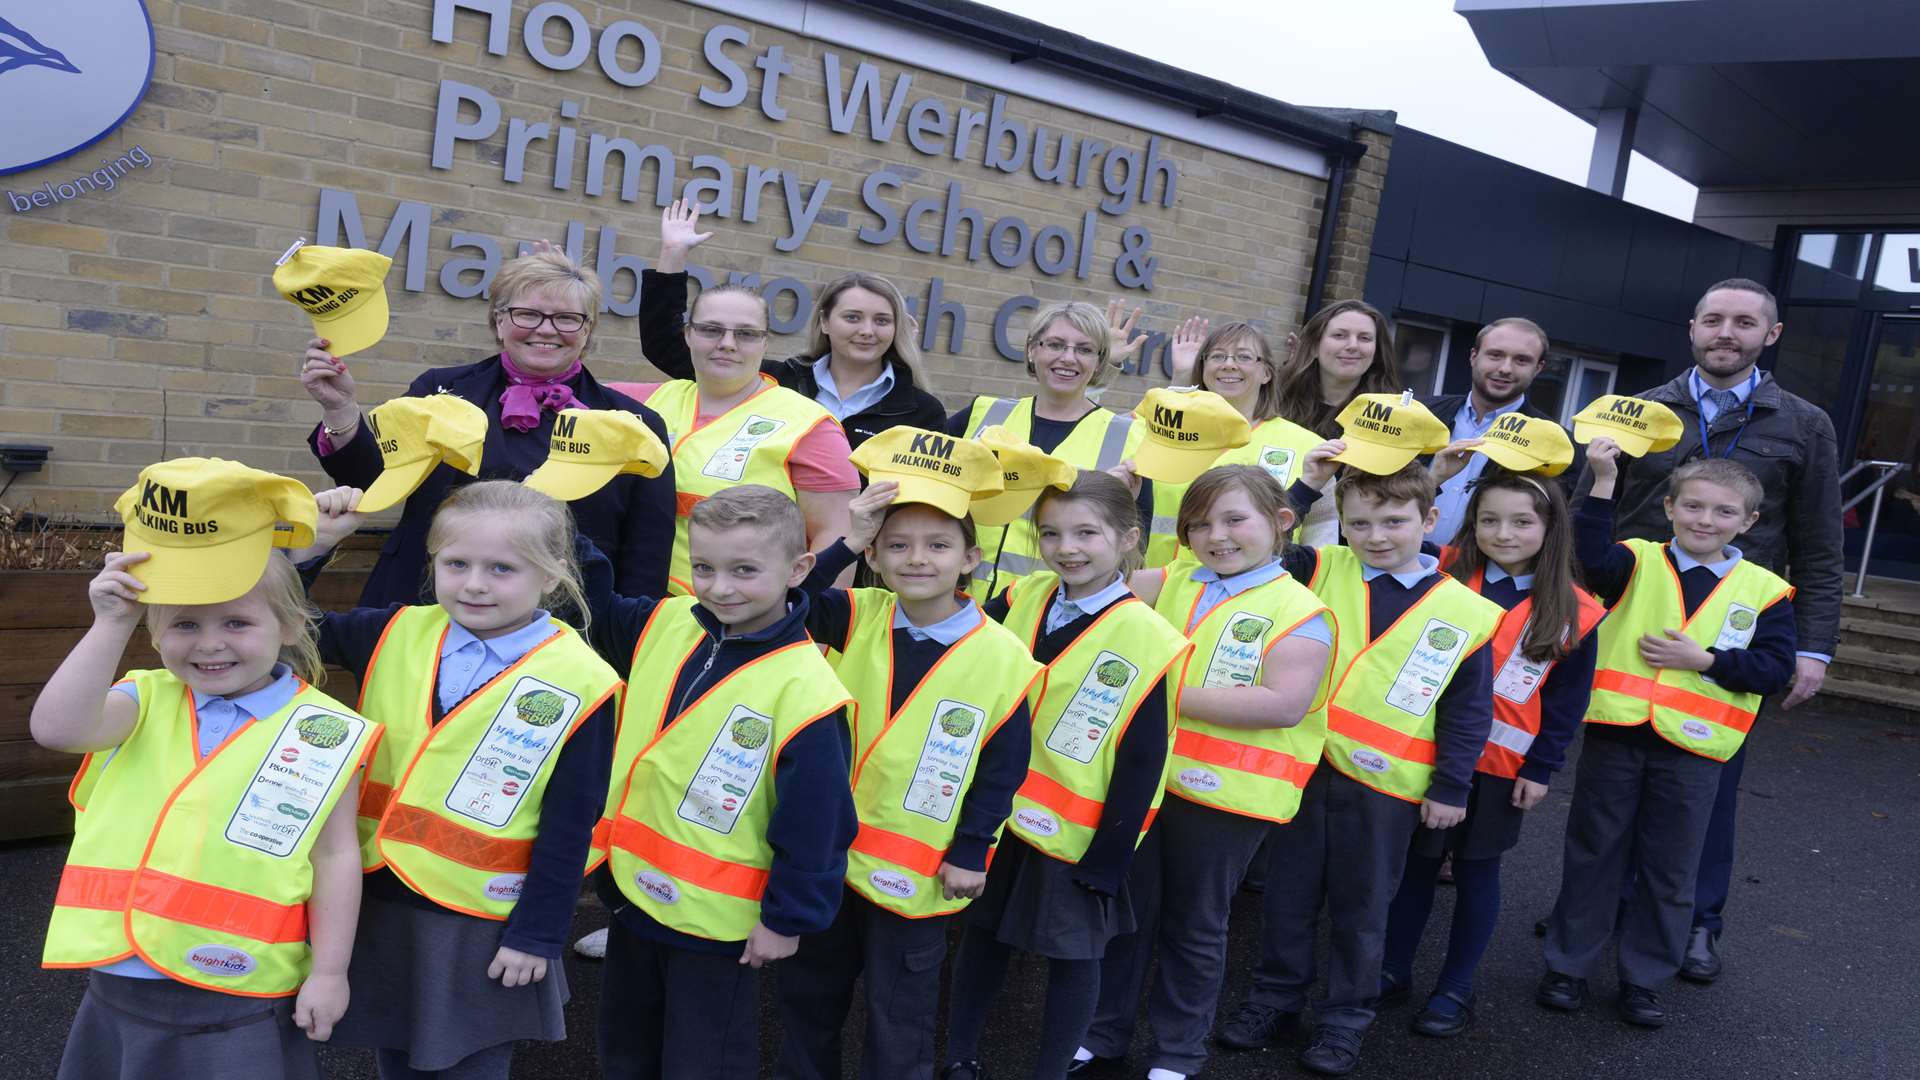 Walking Bus launch Hoo St Werburgh Primary School, Medway with Head of school Tara Deevoy, pupils, parents and supporters Frazer Marshall and Shannon Rivolta of Volker Highways, Specsavers Chatham branch Yve Dixon and James Sutton of Medway Council.